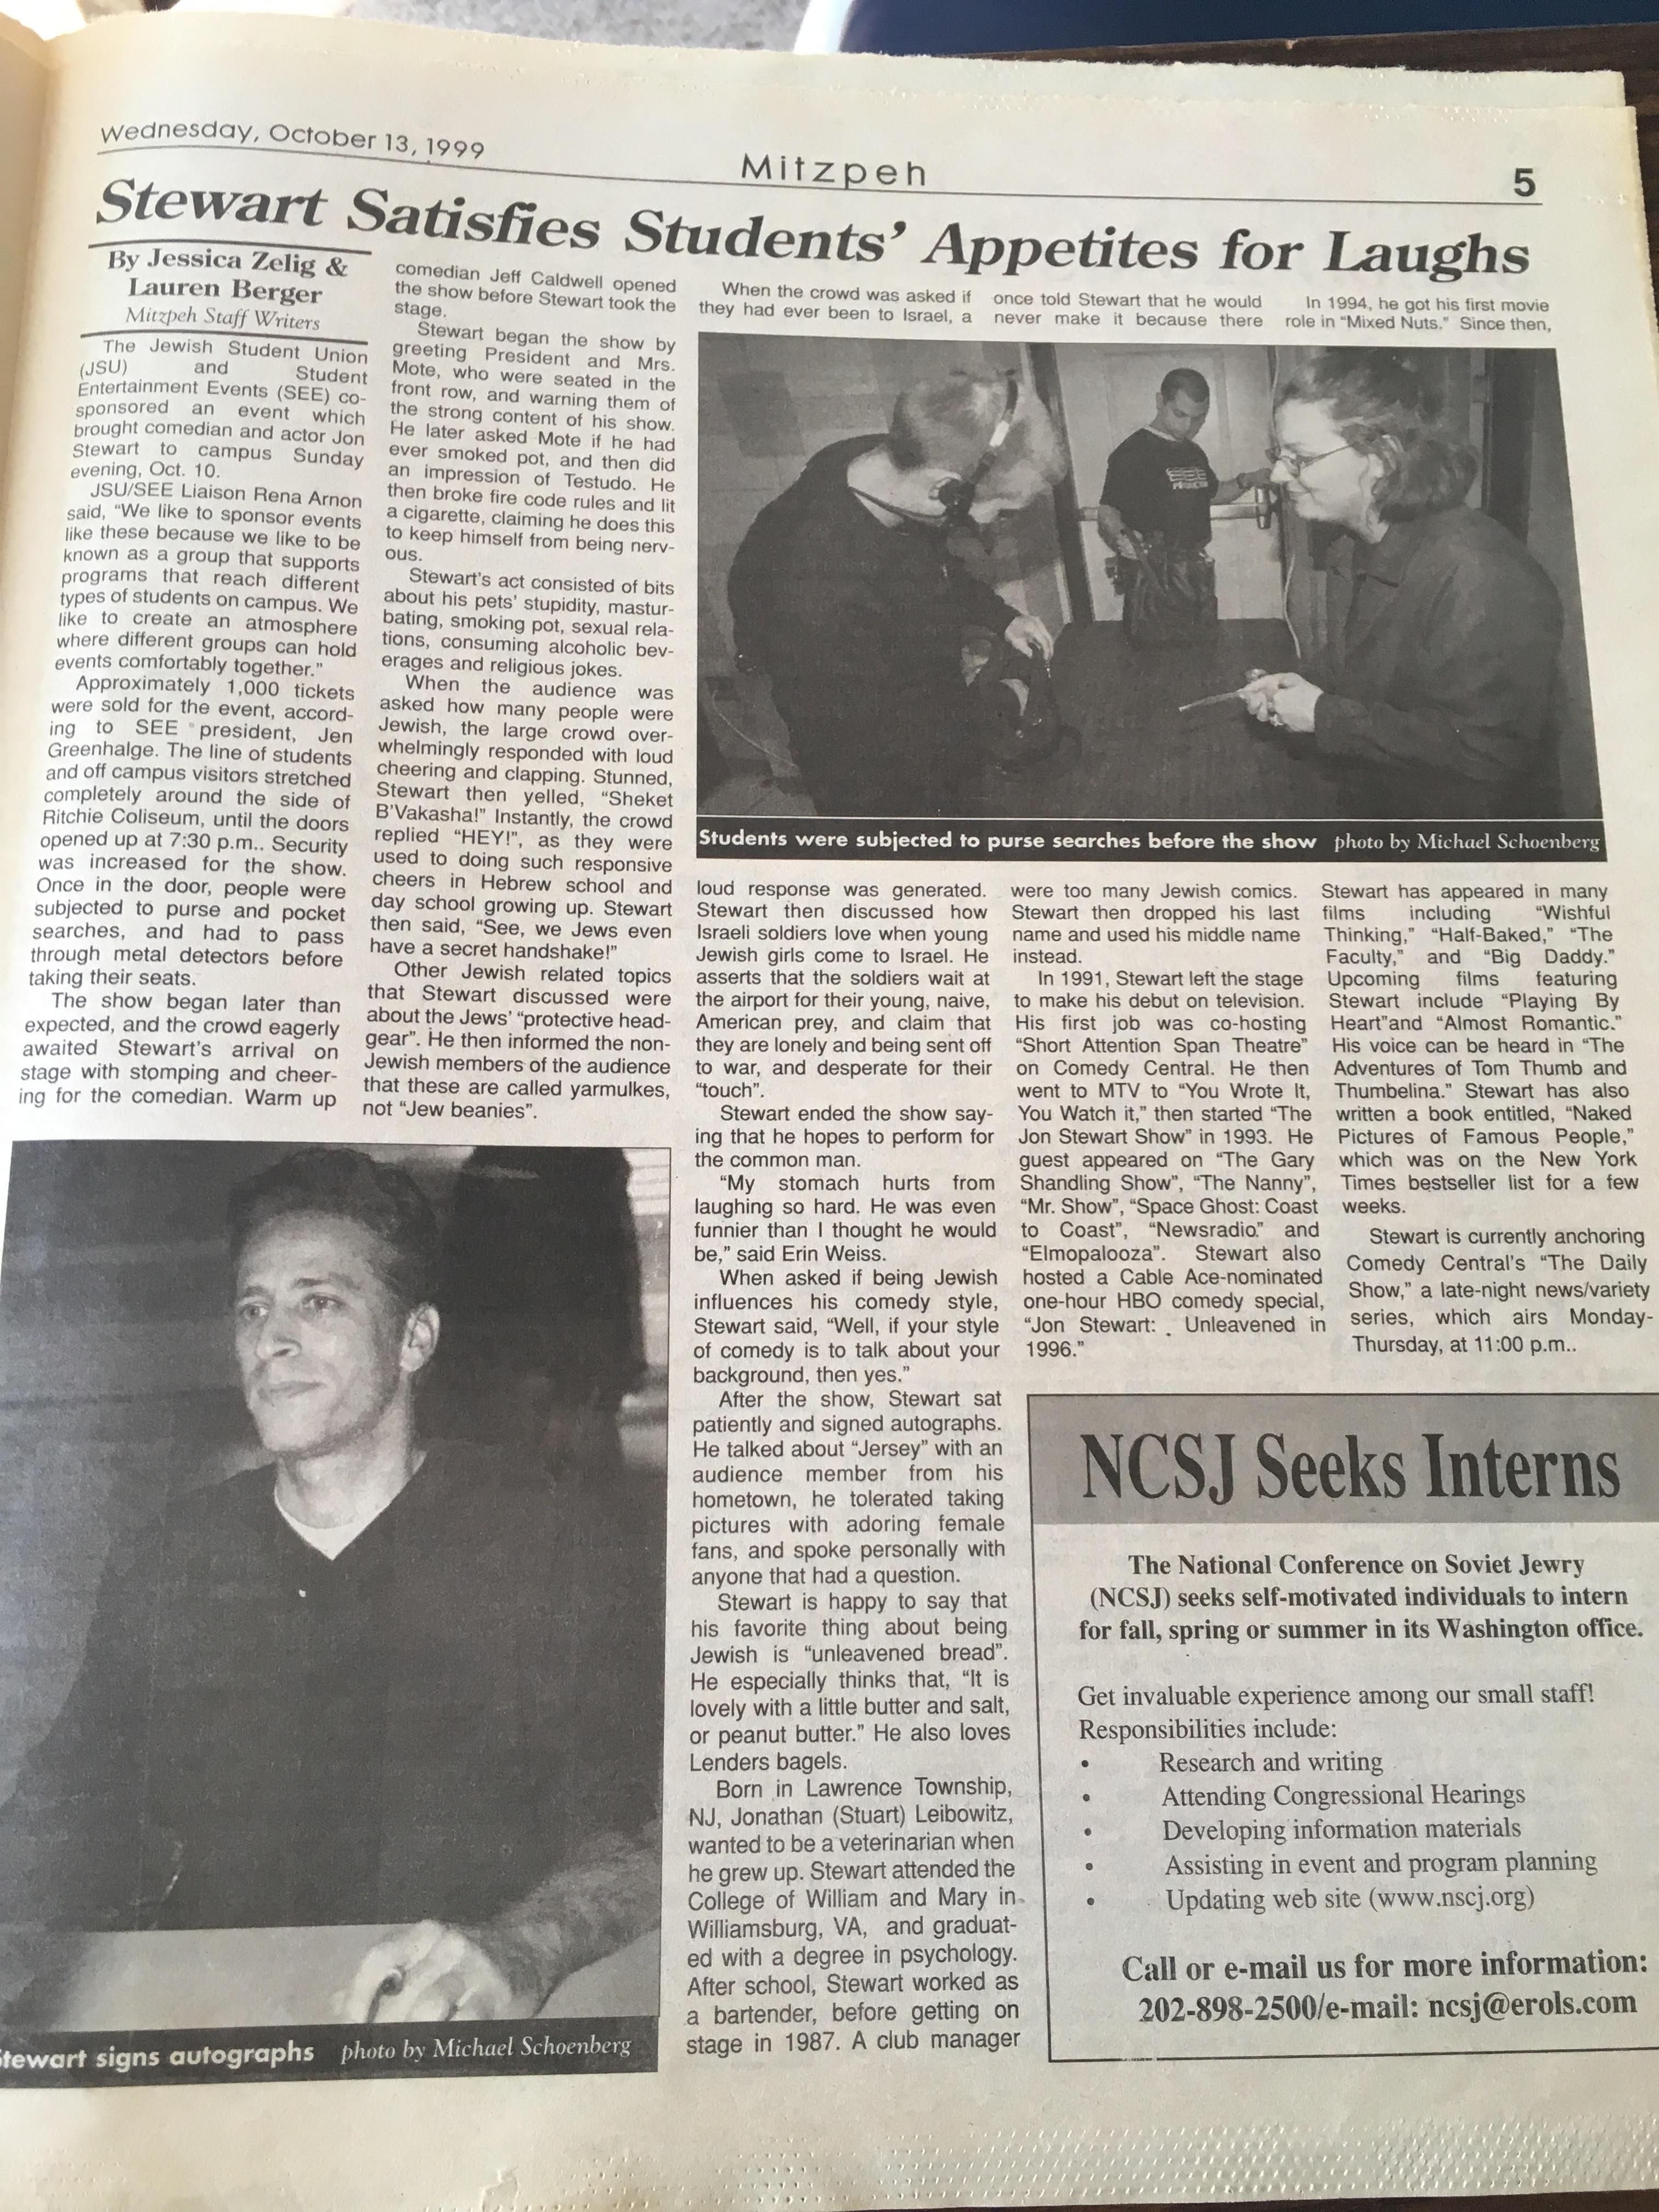 Stewart Satisfies Students’ Appetites for Laughs (Oct. 13, 1999)